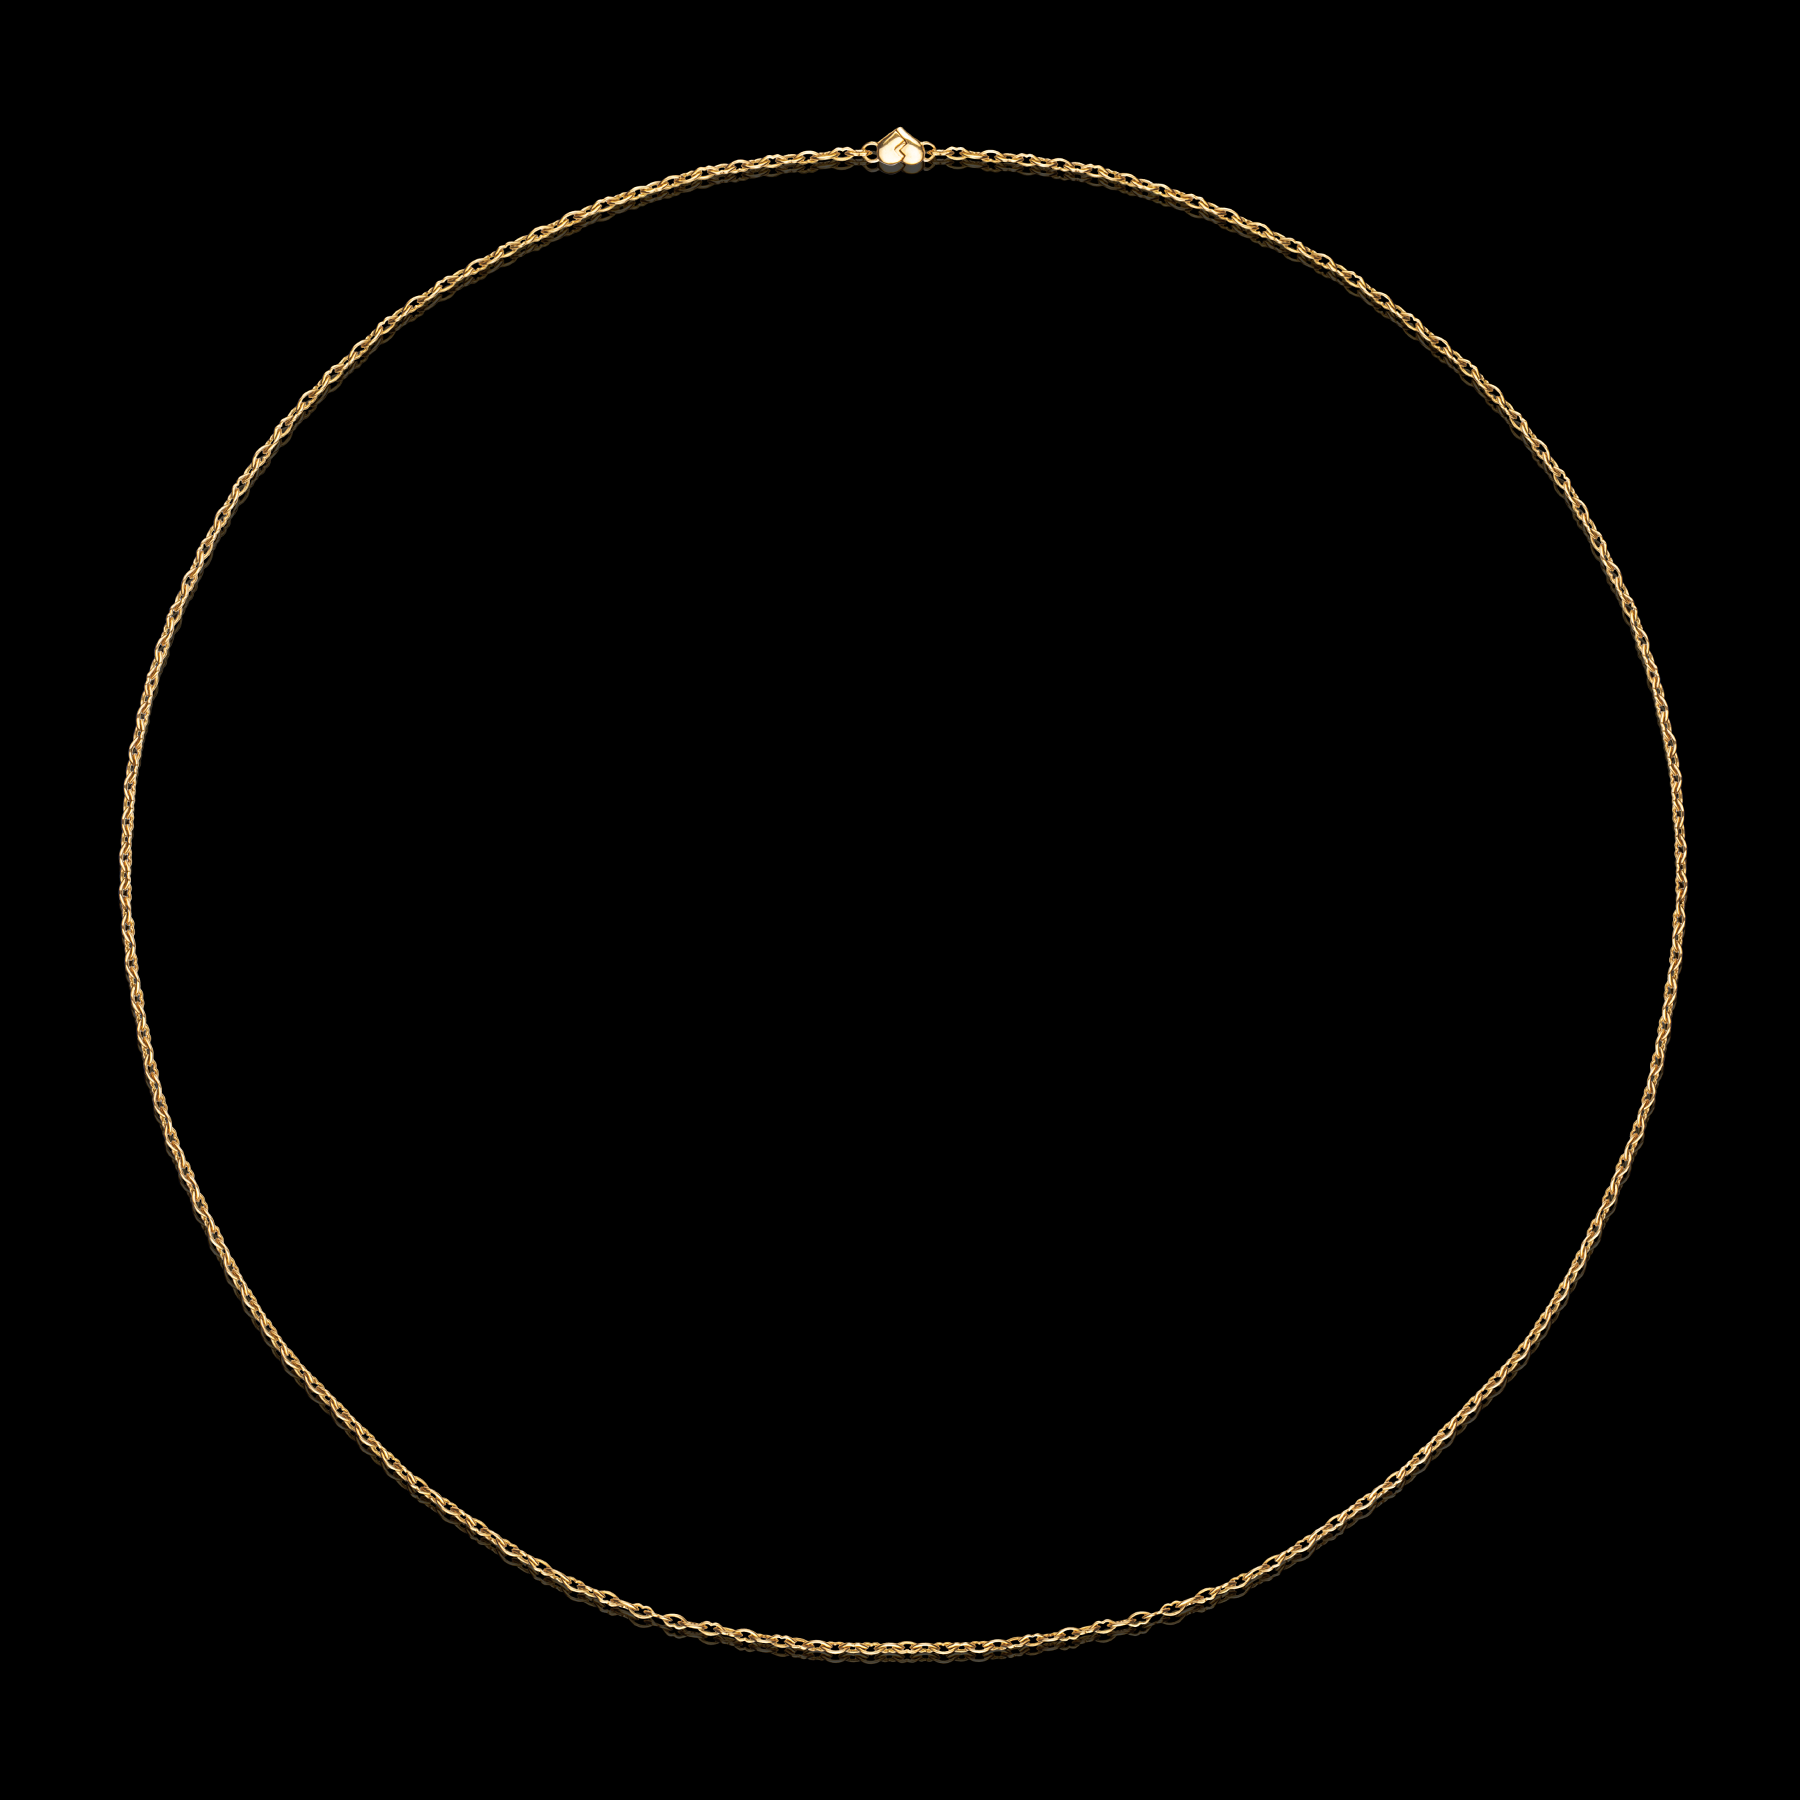 The Love and Kisses chain short necklace by designer Solange Azagury-Partridge - 18 carat Yellow Gold - front flat view